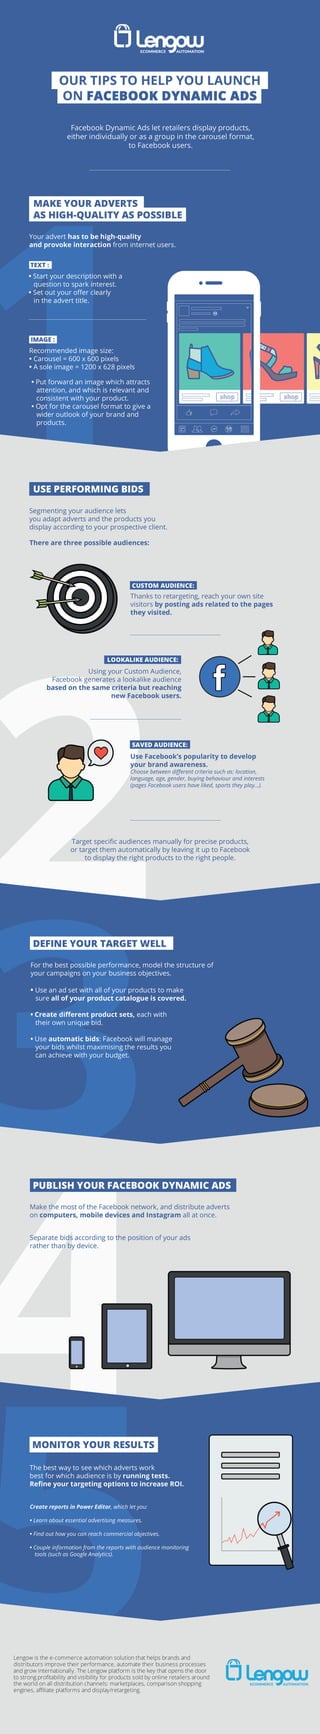 [Infographic] 5 tips to help you start using Facebook Dynamic Ads